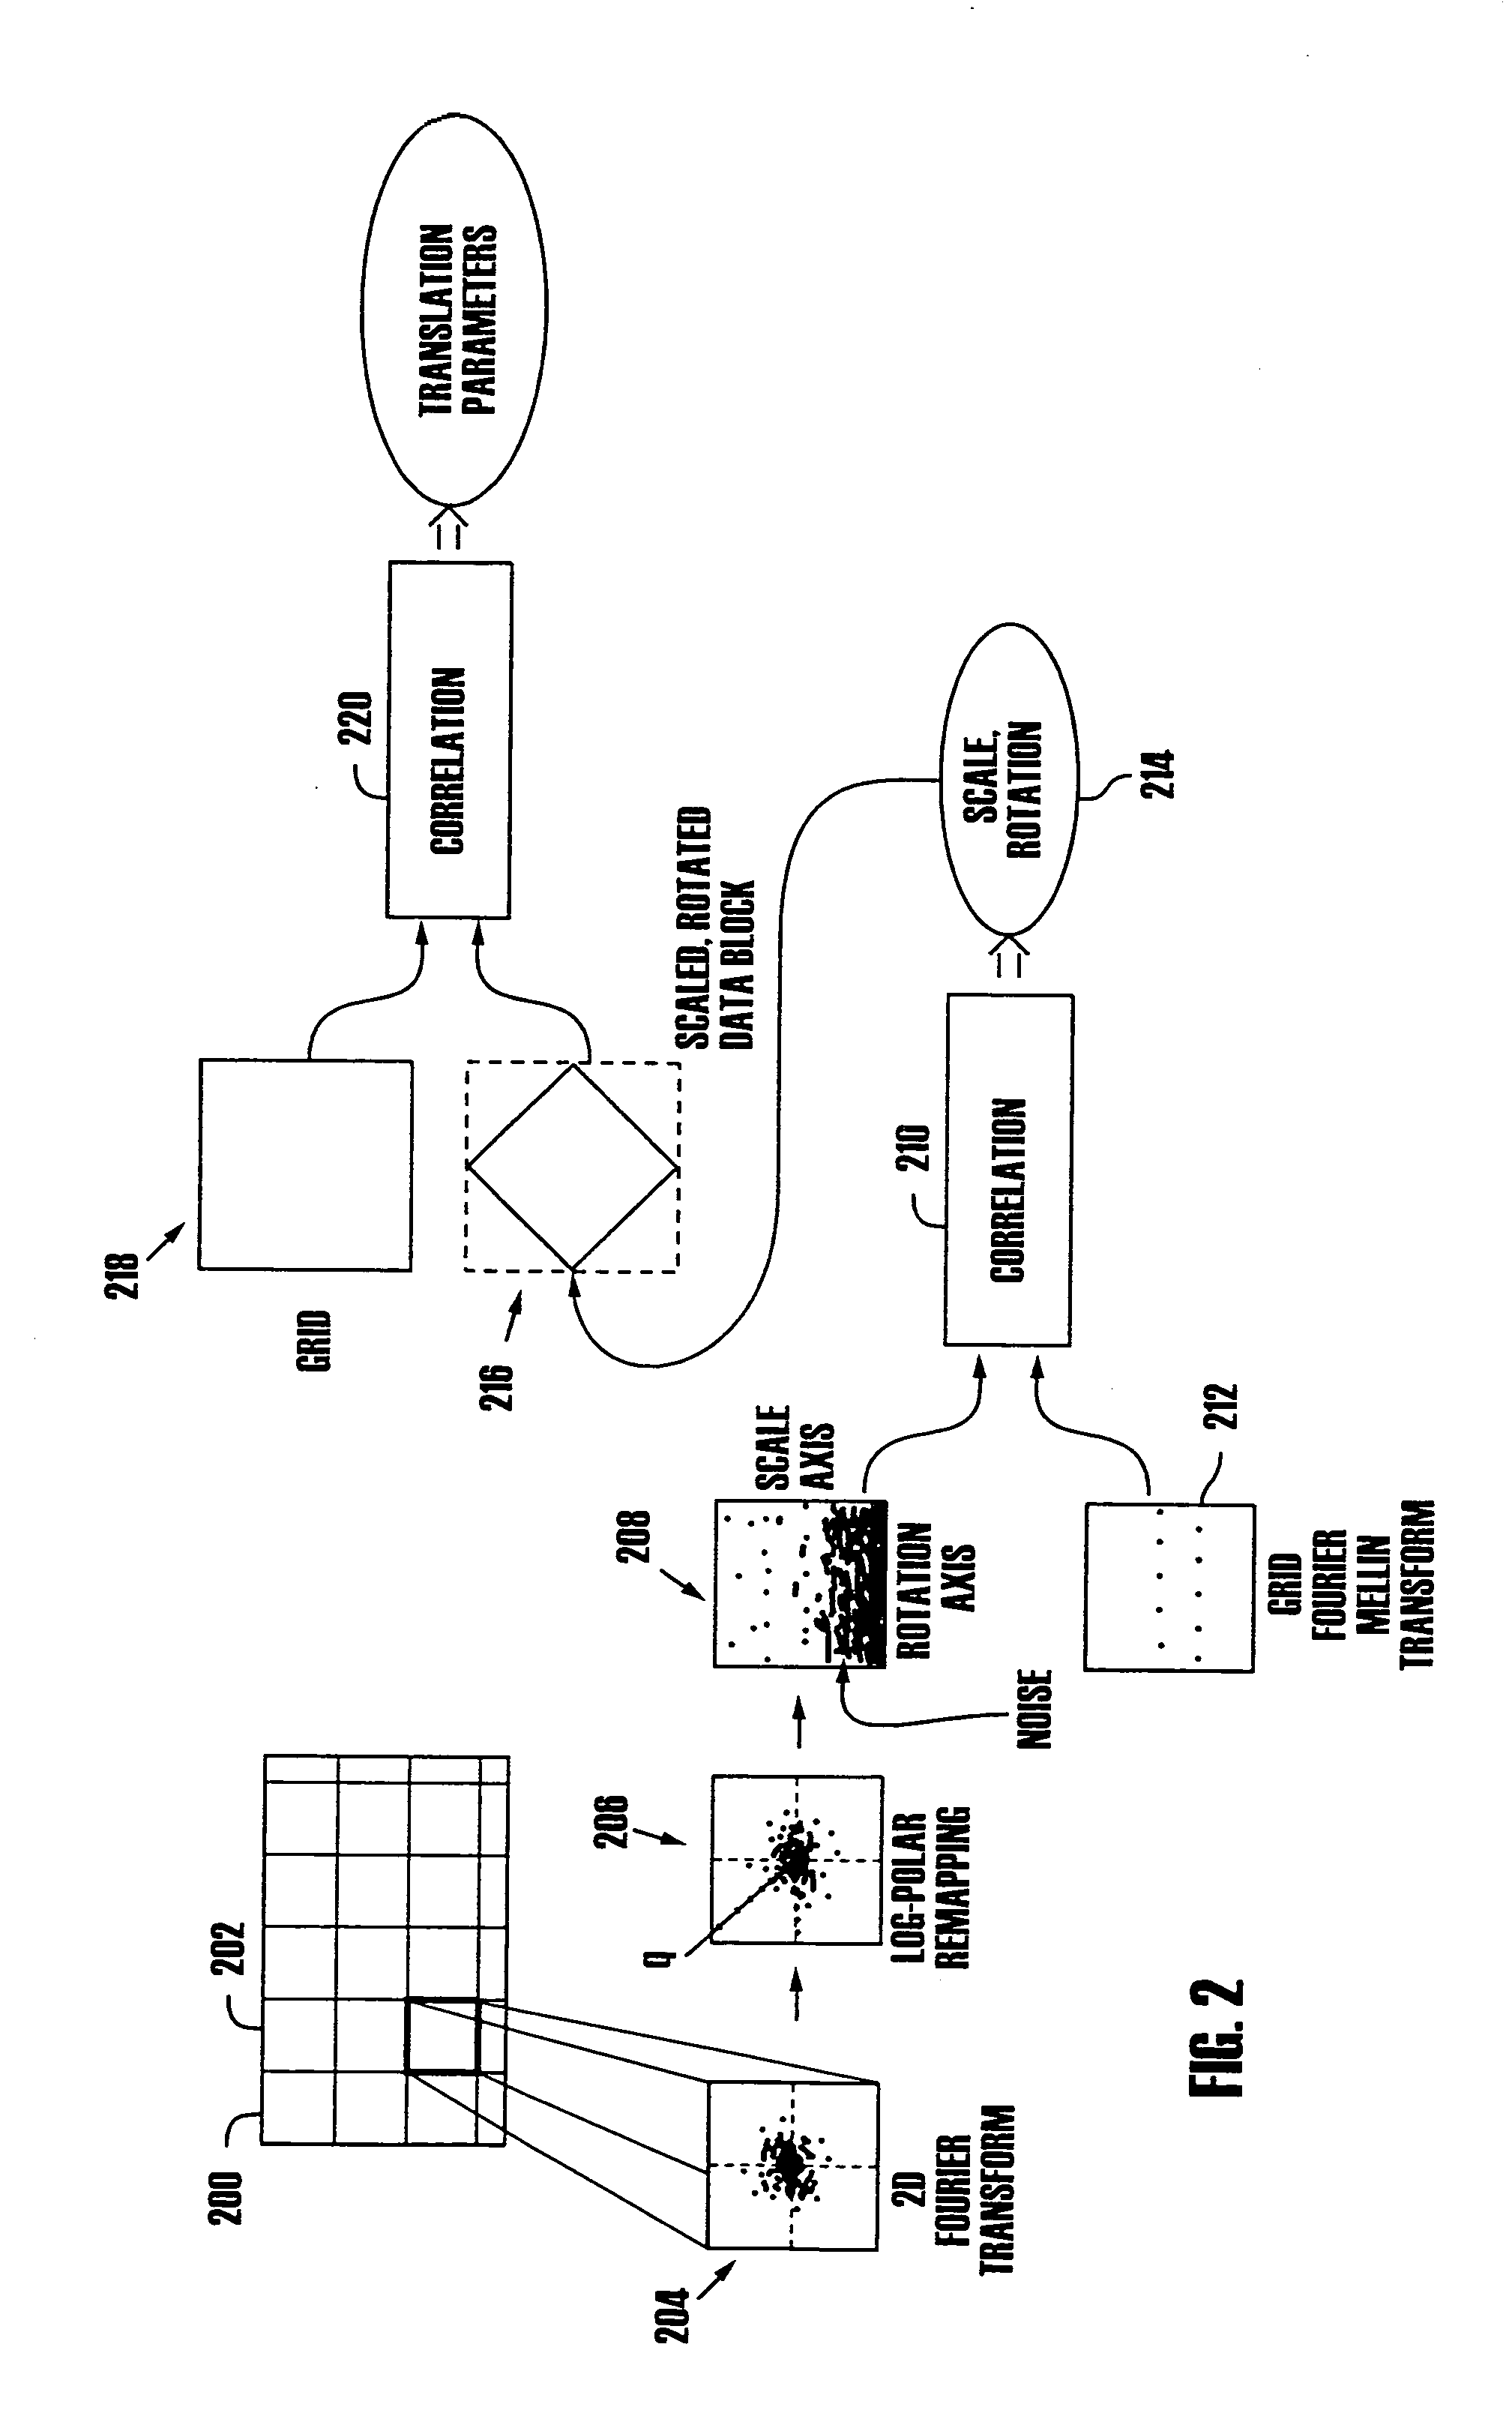 Image processing using embedded registration data to determine and compensate for geometric transformation